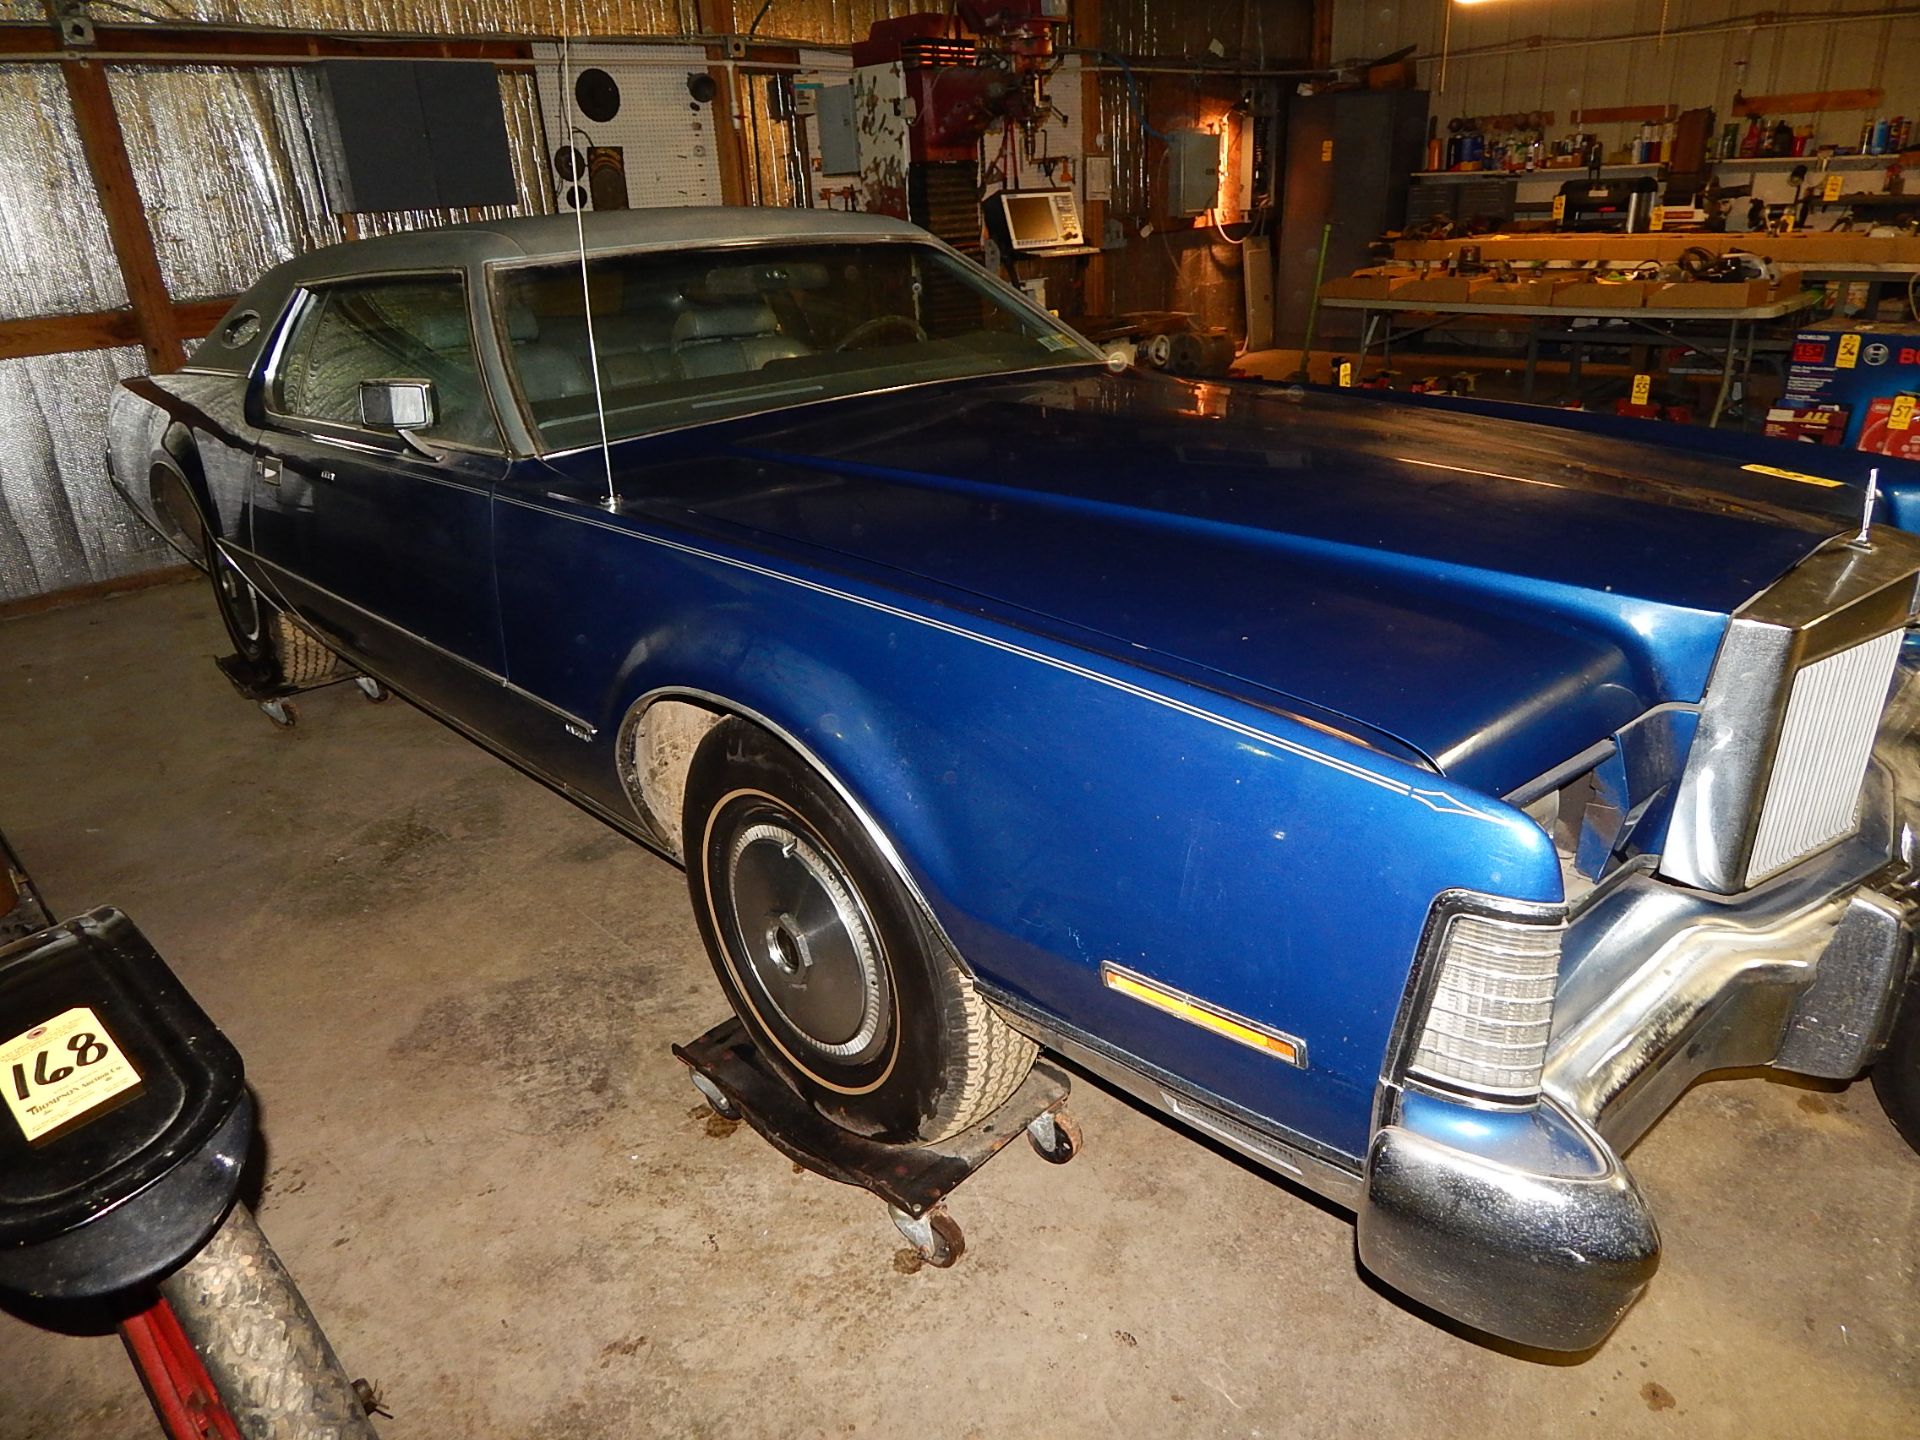 1973 Lincoln Mark IV 2-Door Coupe, VIN 3Y89A845393, Leather, PW, PL, Automatic, 11,380 Miles showing - Image 3 of 7